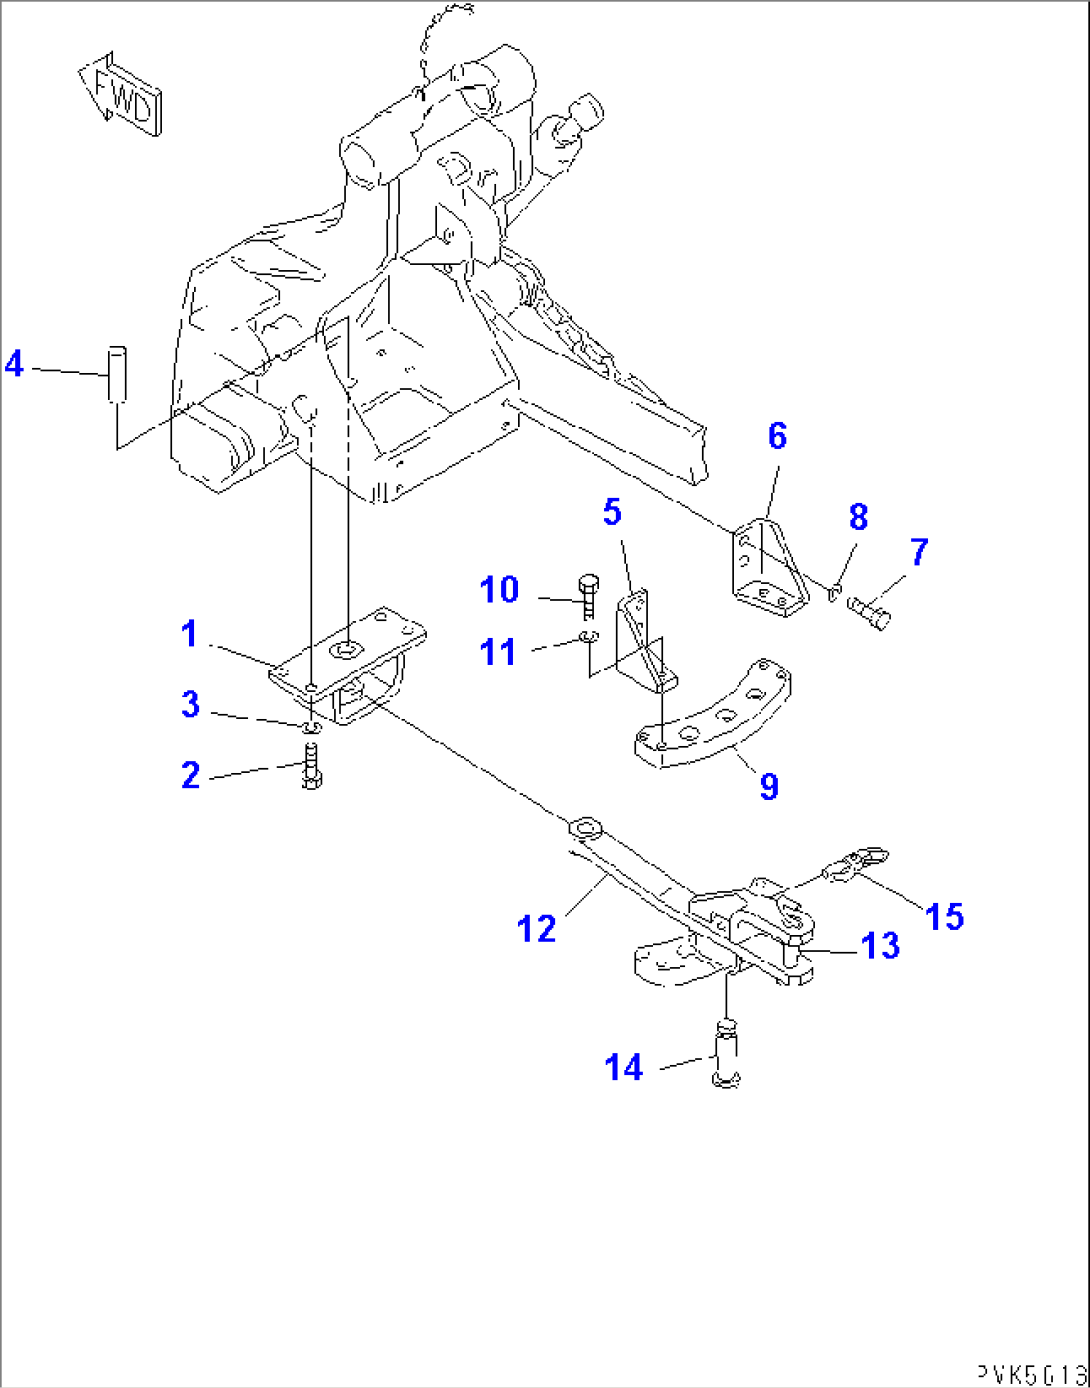 SWING DRAWBER (FOR 3-POINT HITCH)